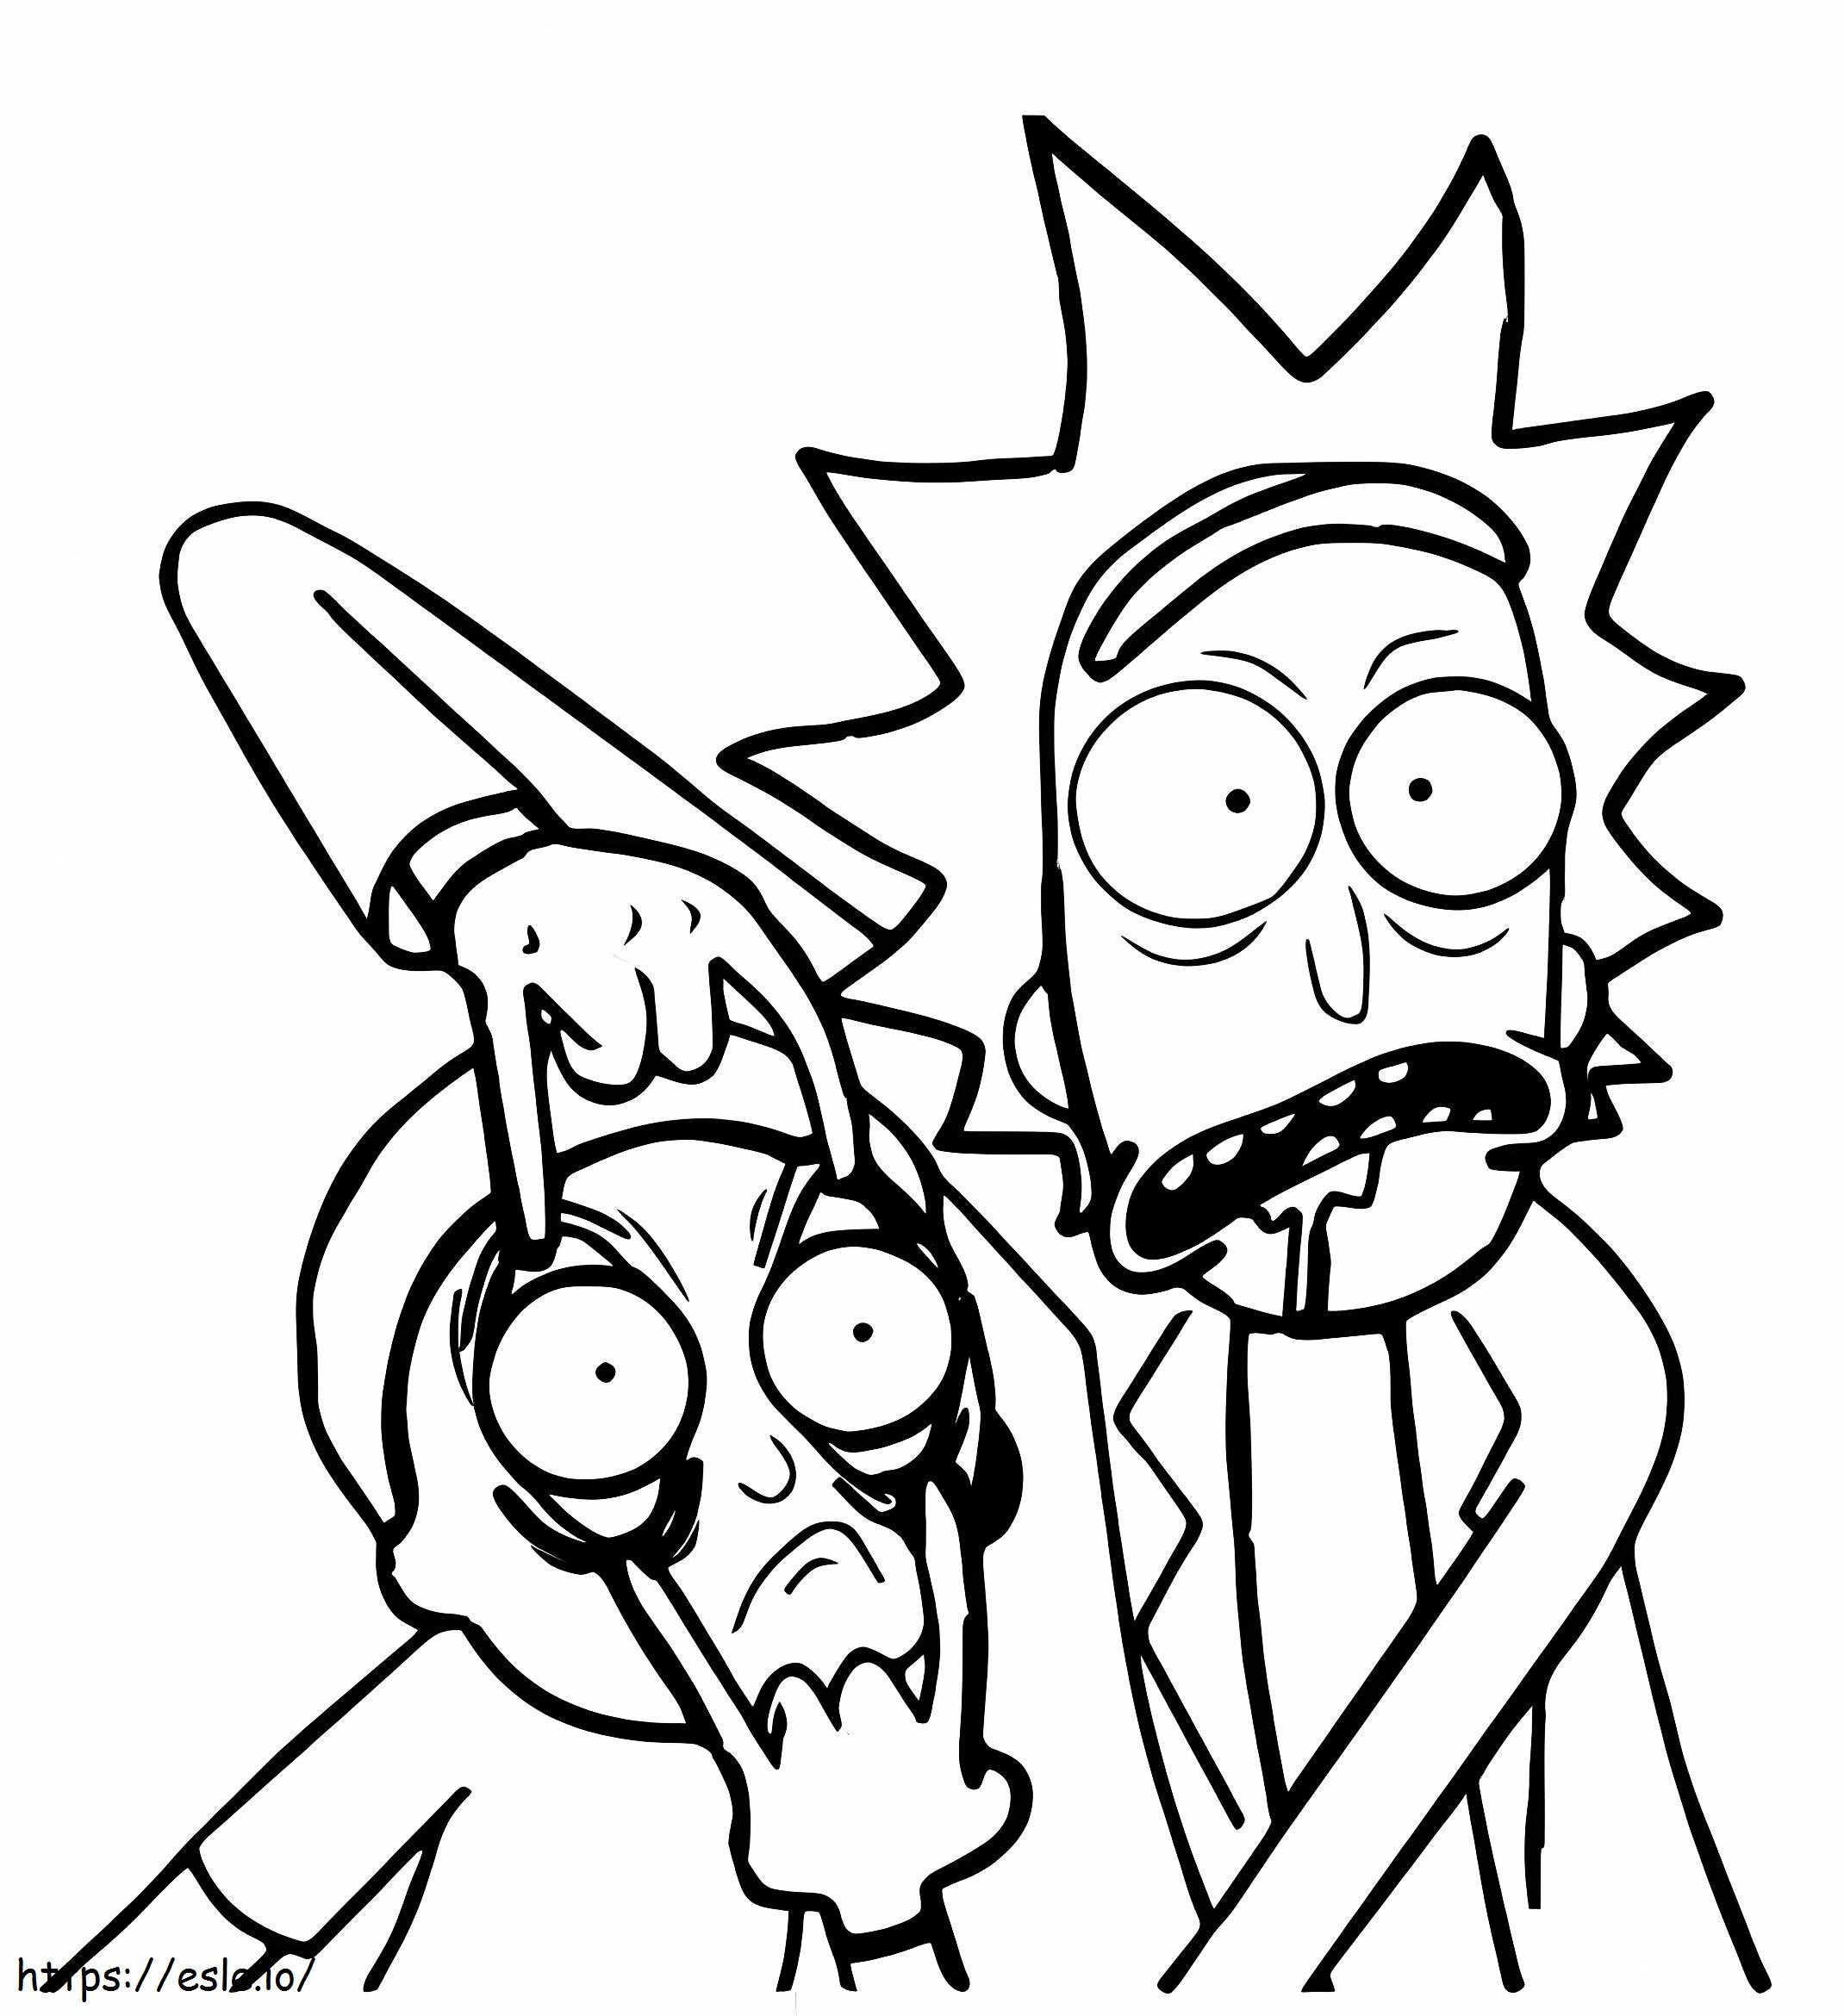 Rick Sanchez And Morty Humor coloring page